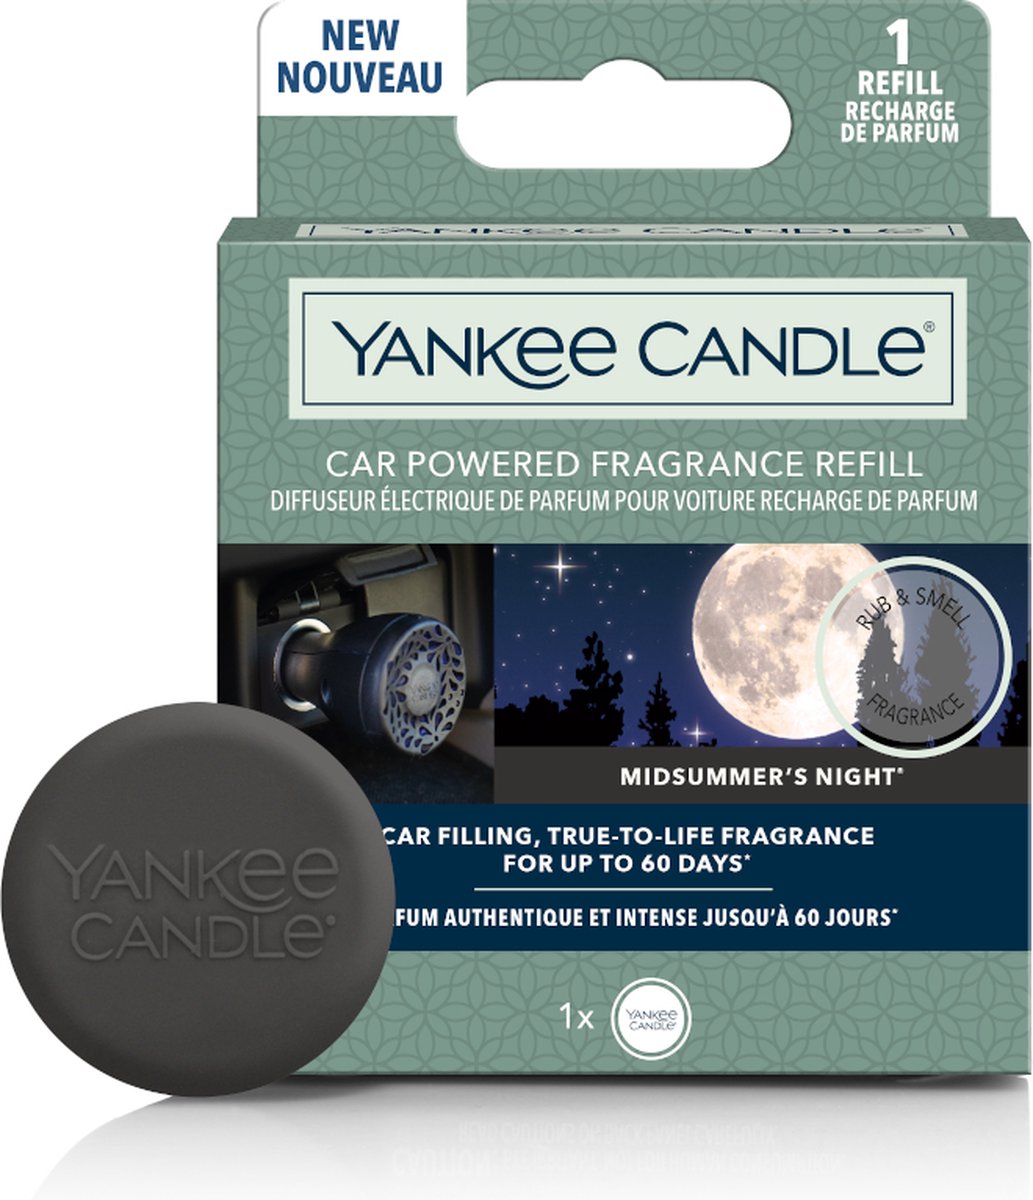 Yankee Candle Car Powered Fragrance Refill Midsummer's Night